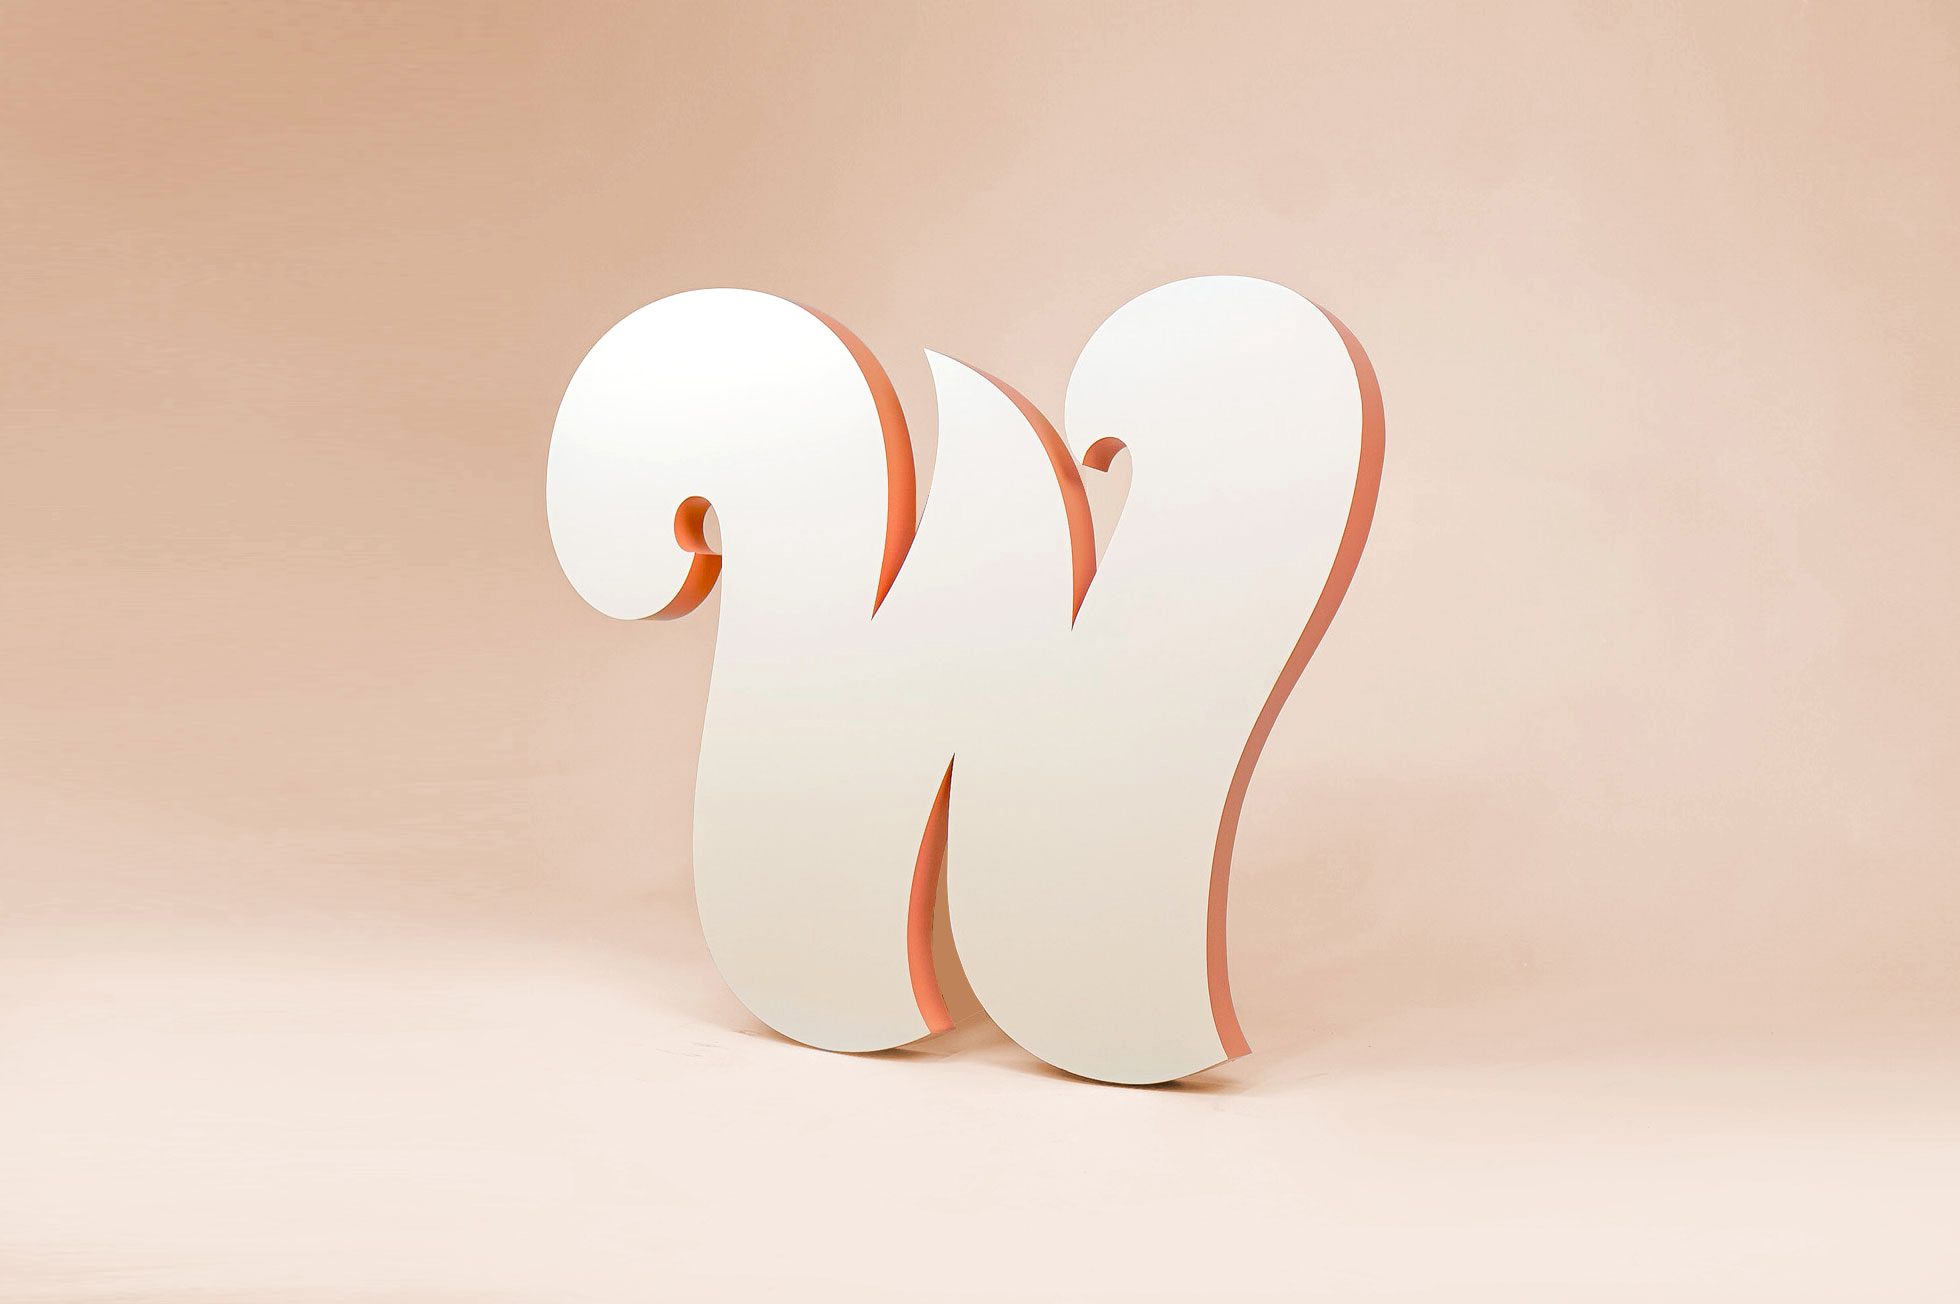 "W" wing logo in tone-on-tone paint with contrasting edges for the lobby of the Williamsburg location of The Wing, a co-working space for women.